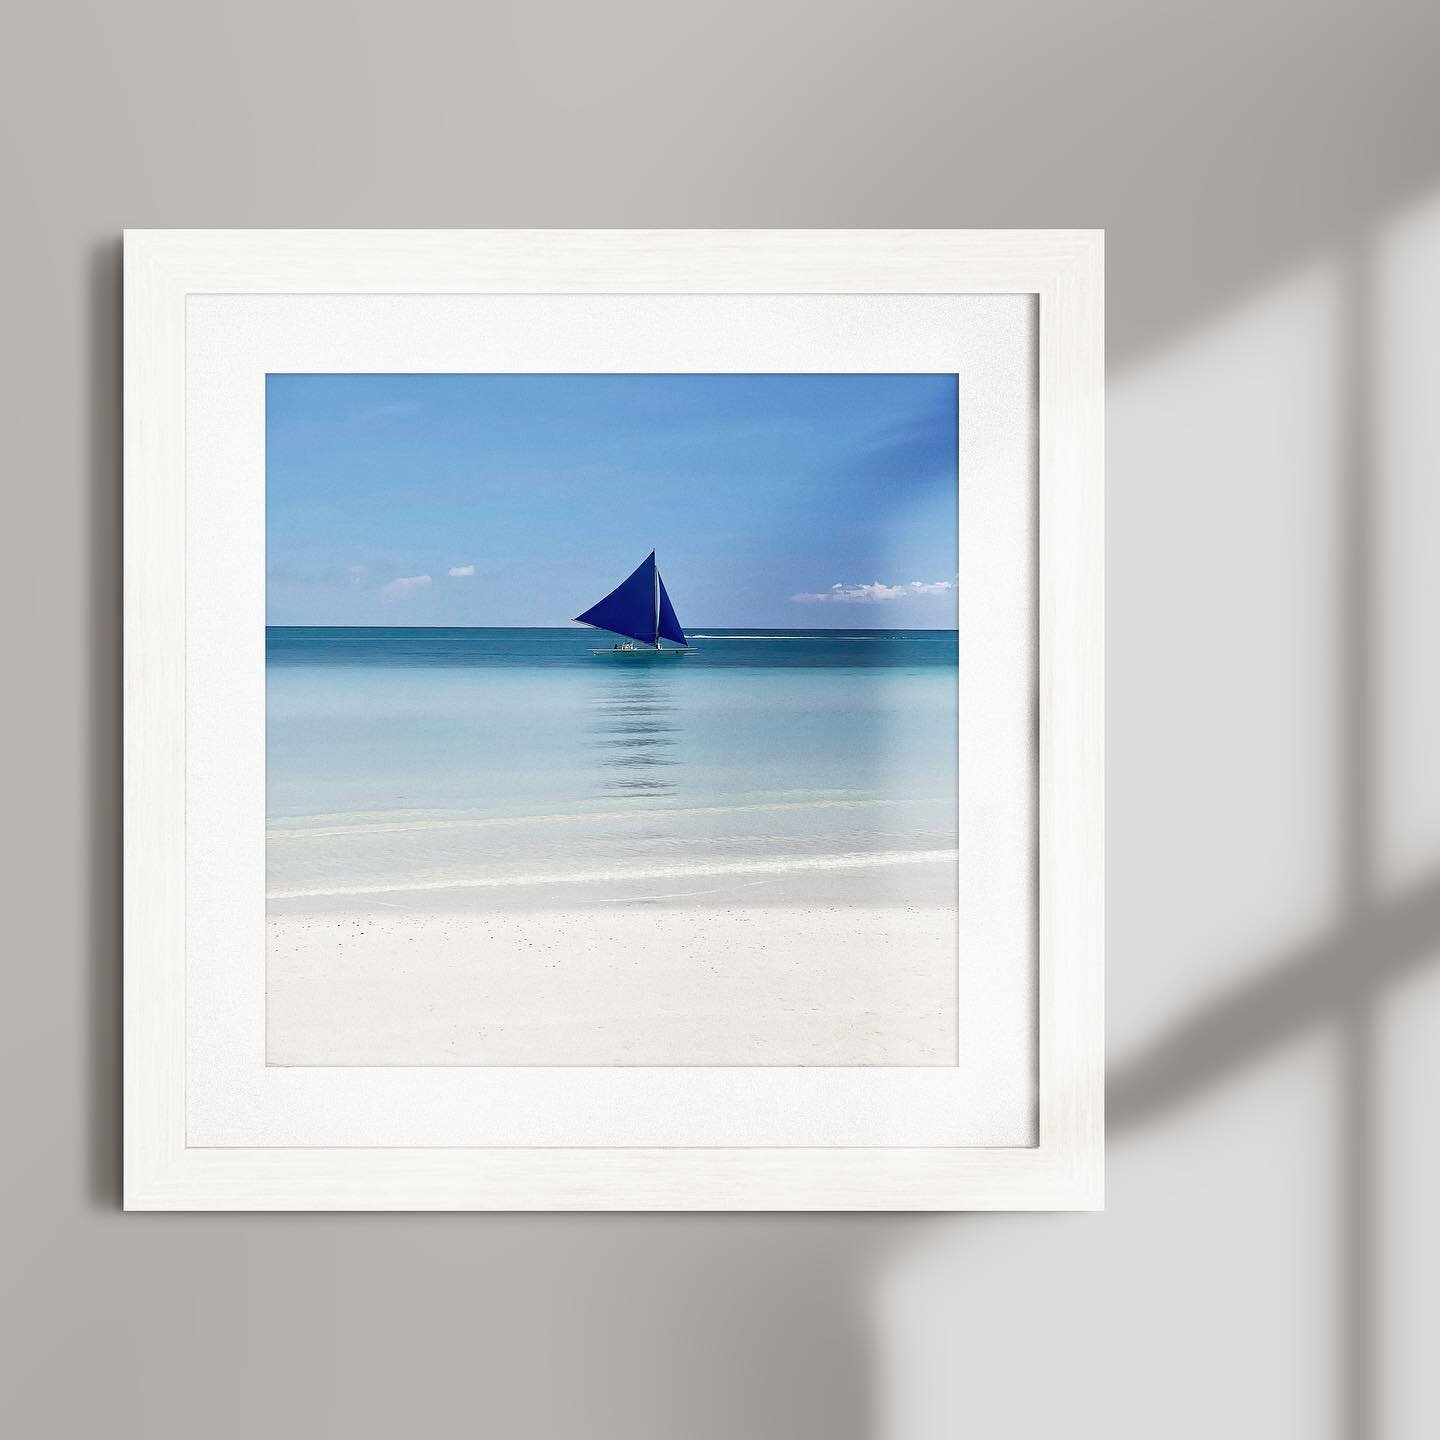 First of new photos from Boracay is now available! 🏝 Framed Photo of Paraw (Sail) Boat and Beach in Boracay, Philippines printed on Fine Art Paper Velvet with 1&quot; White Matting protected by Premium Clear Acrylic Glass. Available in Black and Whi